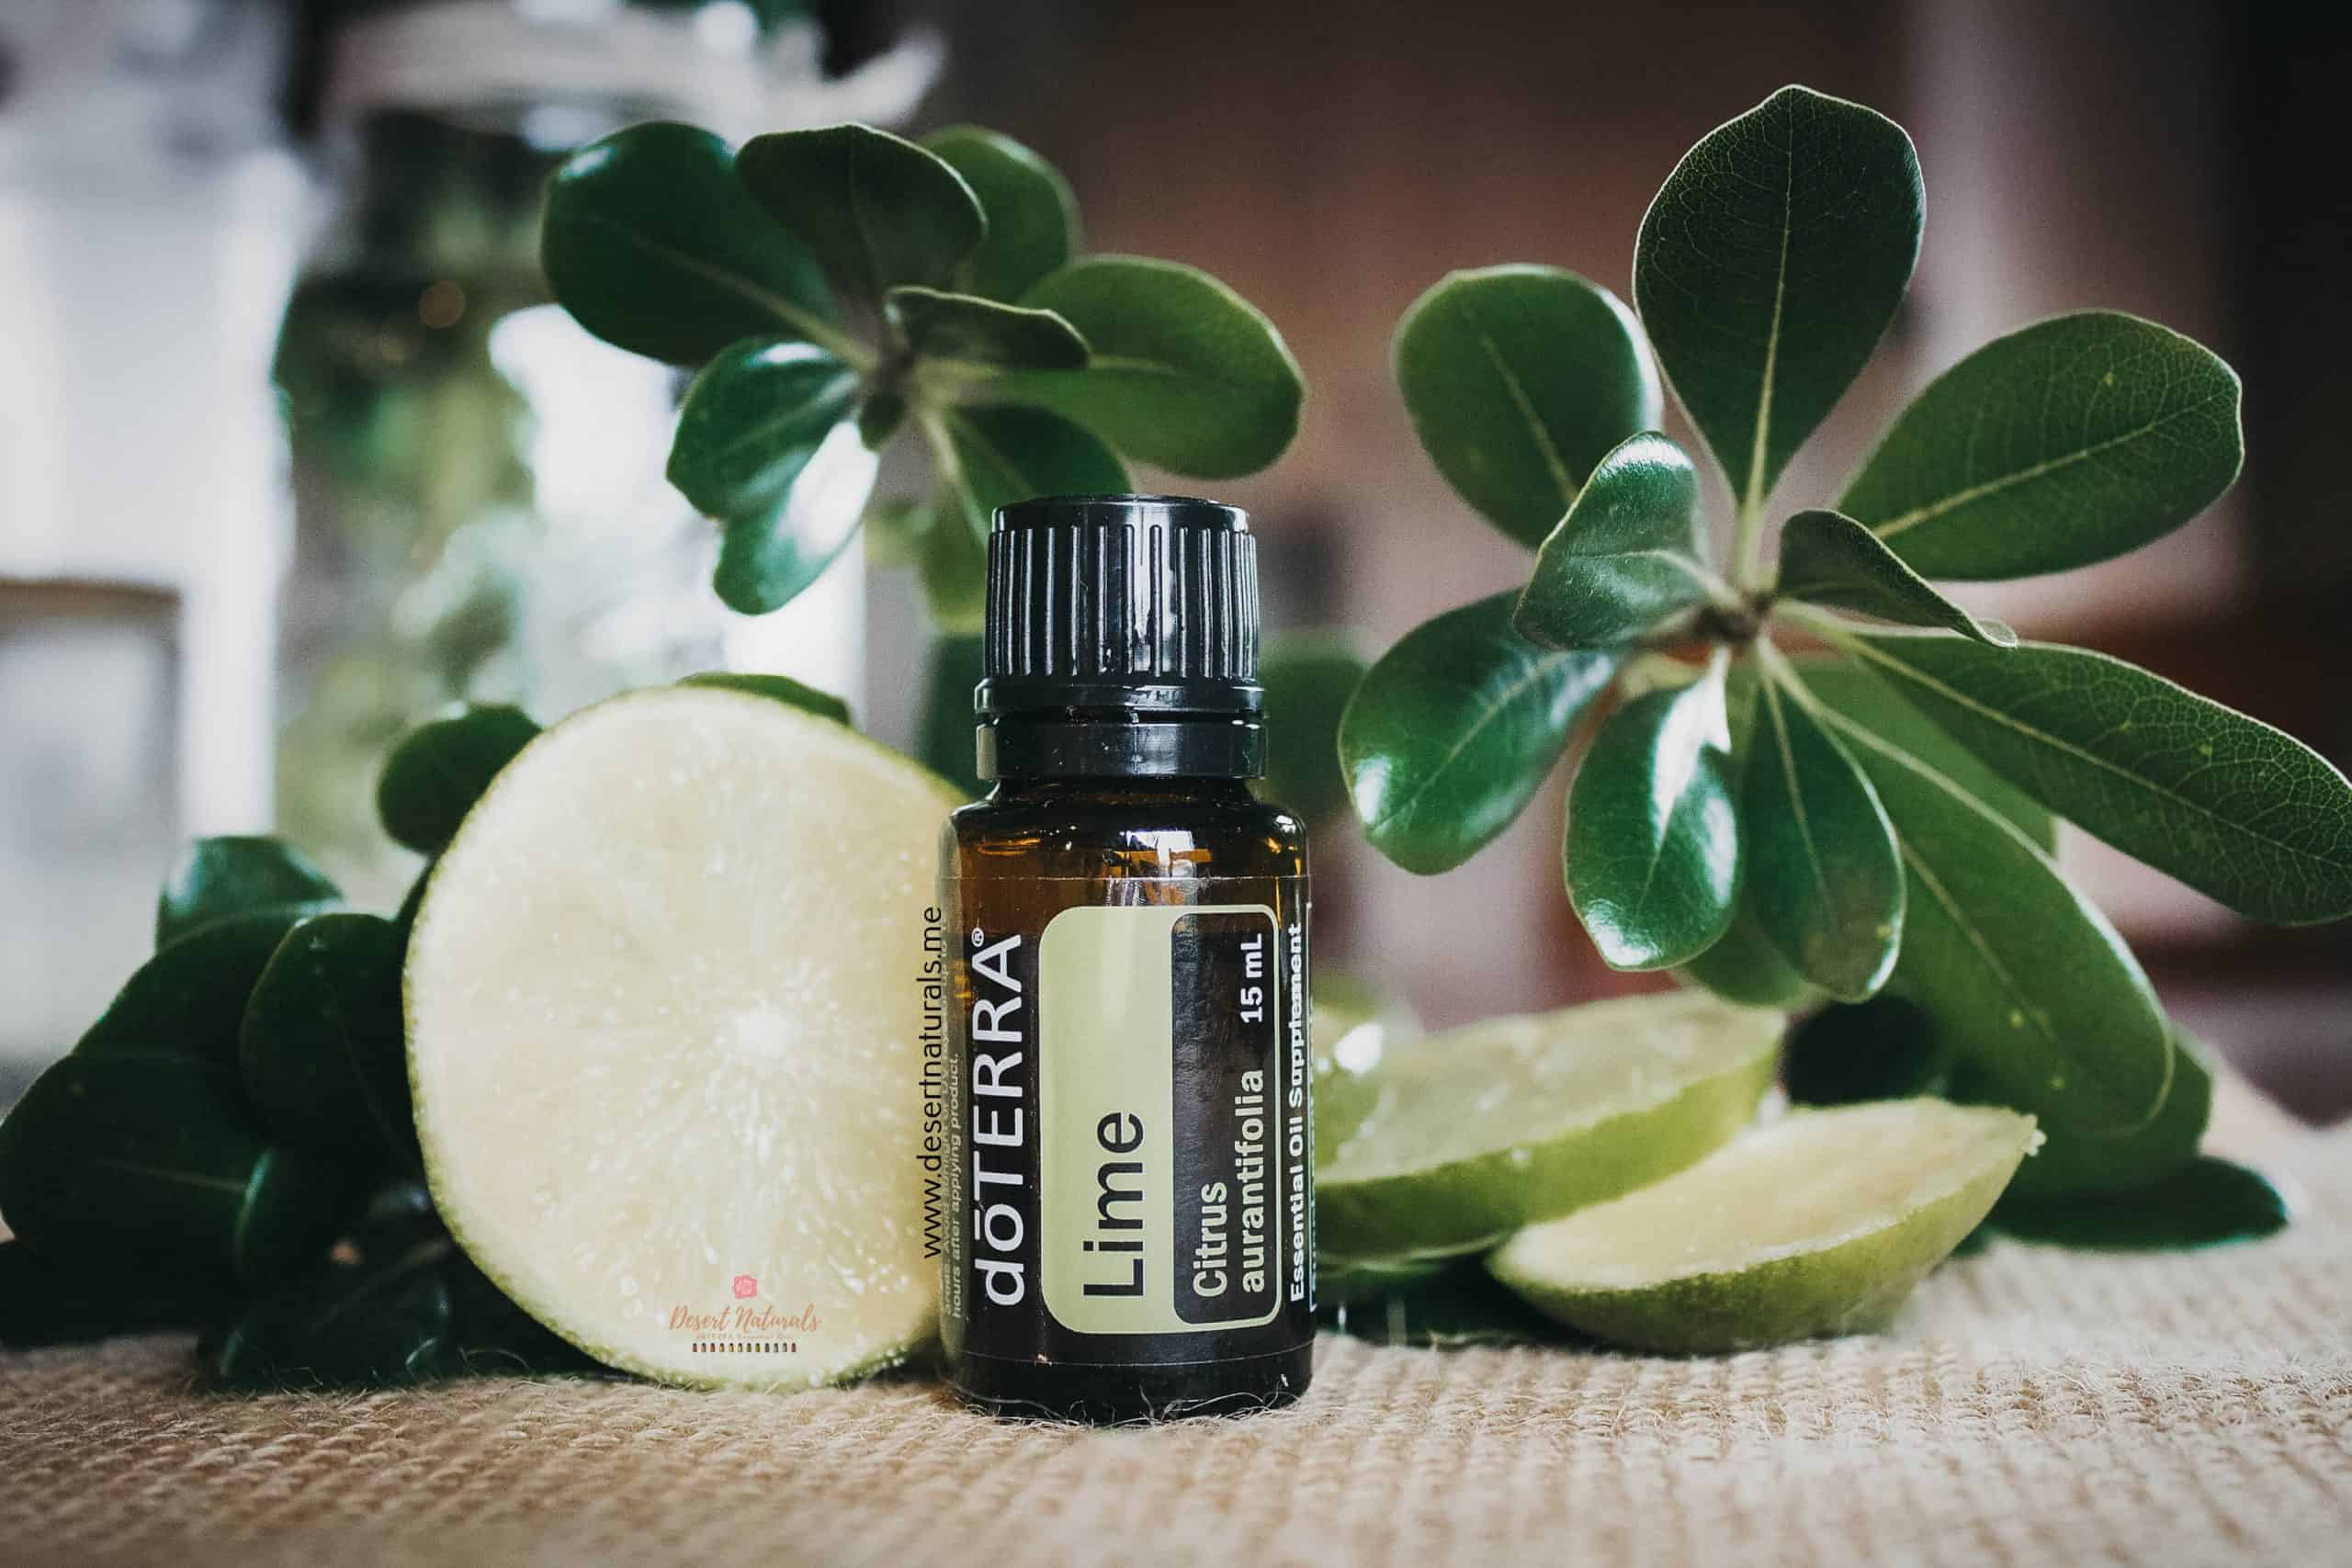 Lime essential oil from doTERRA is very effective in green cleaning recipes